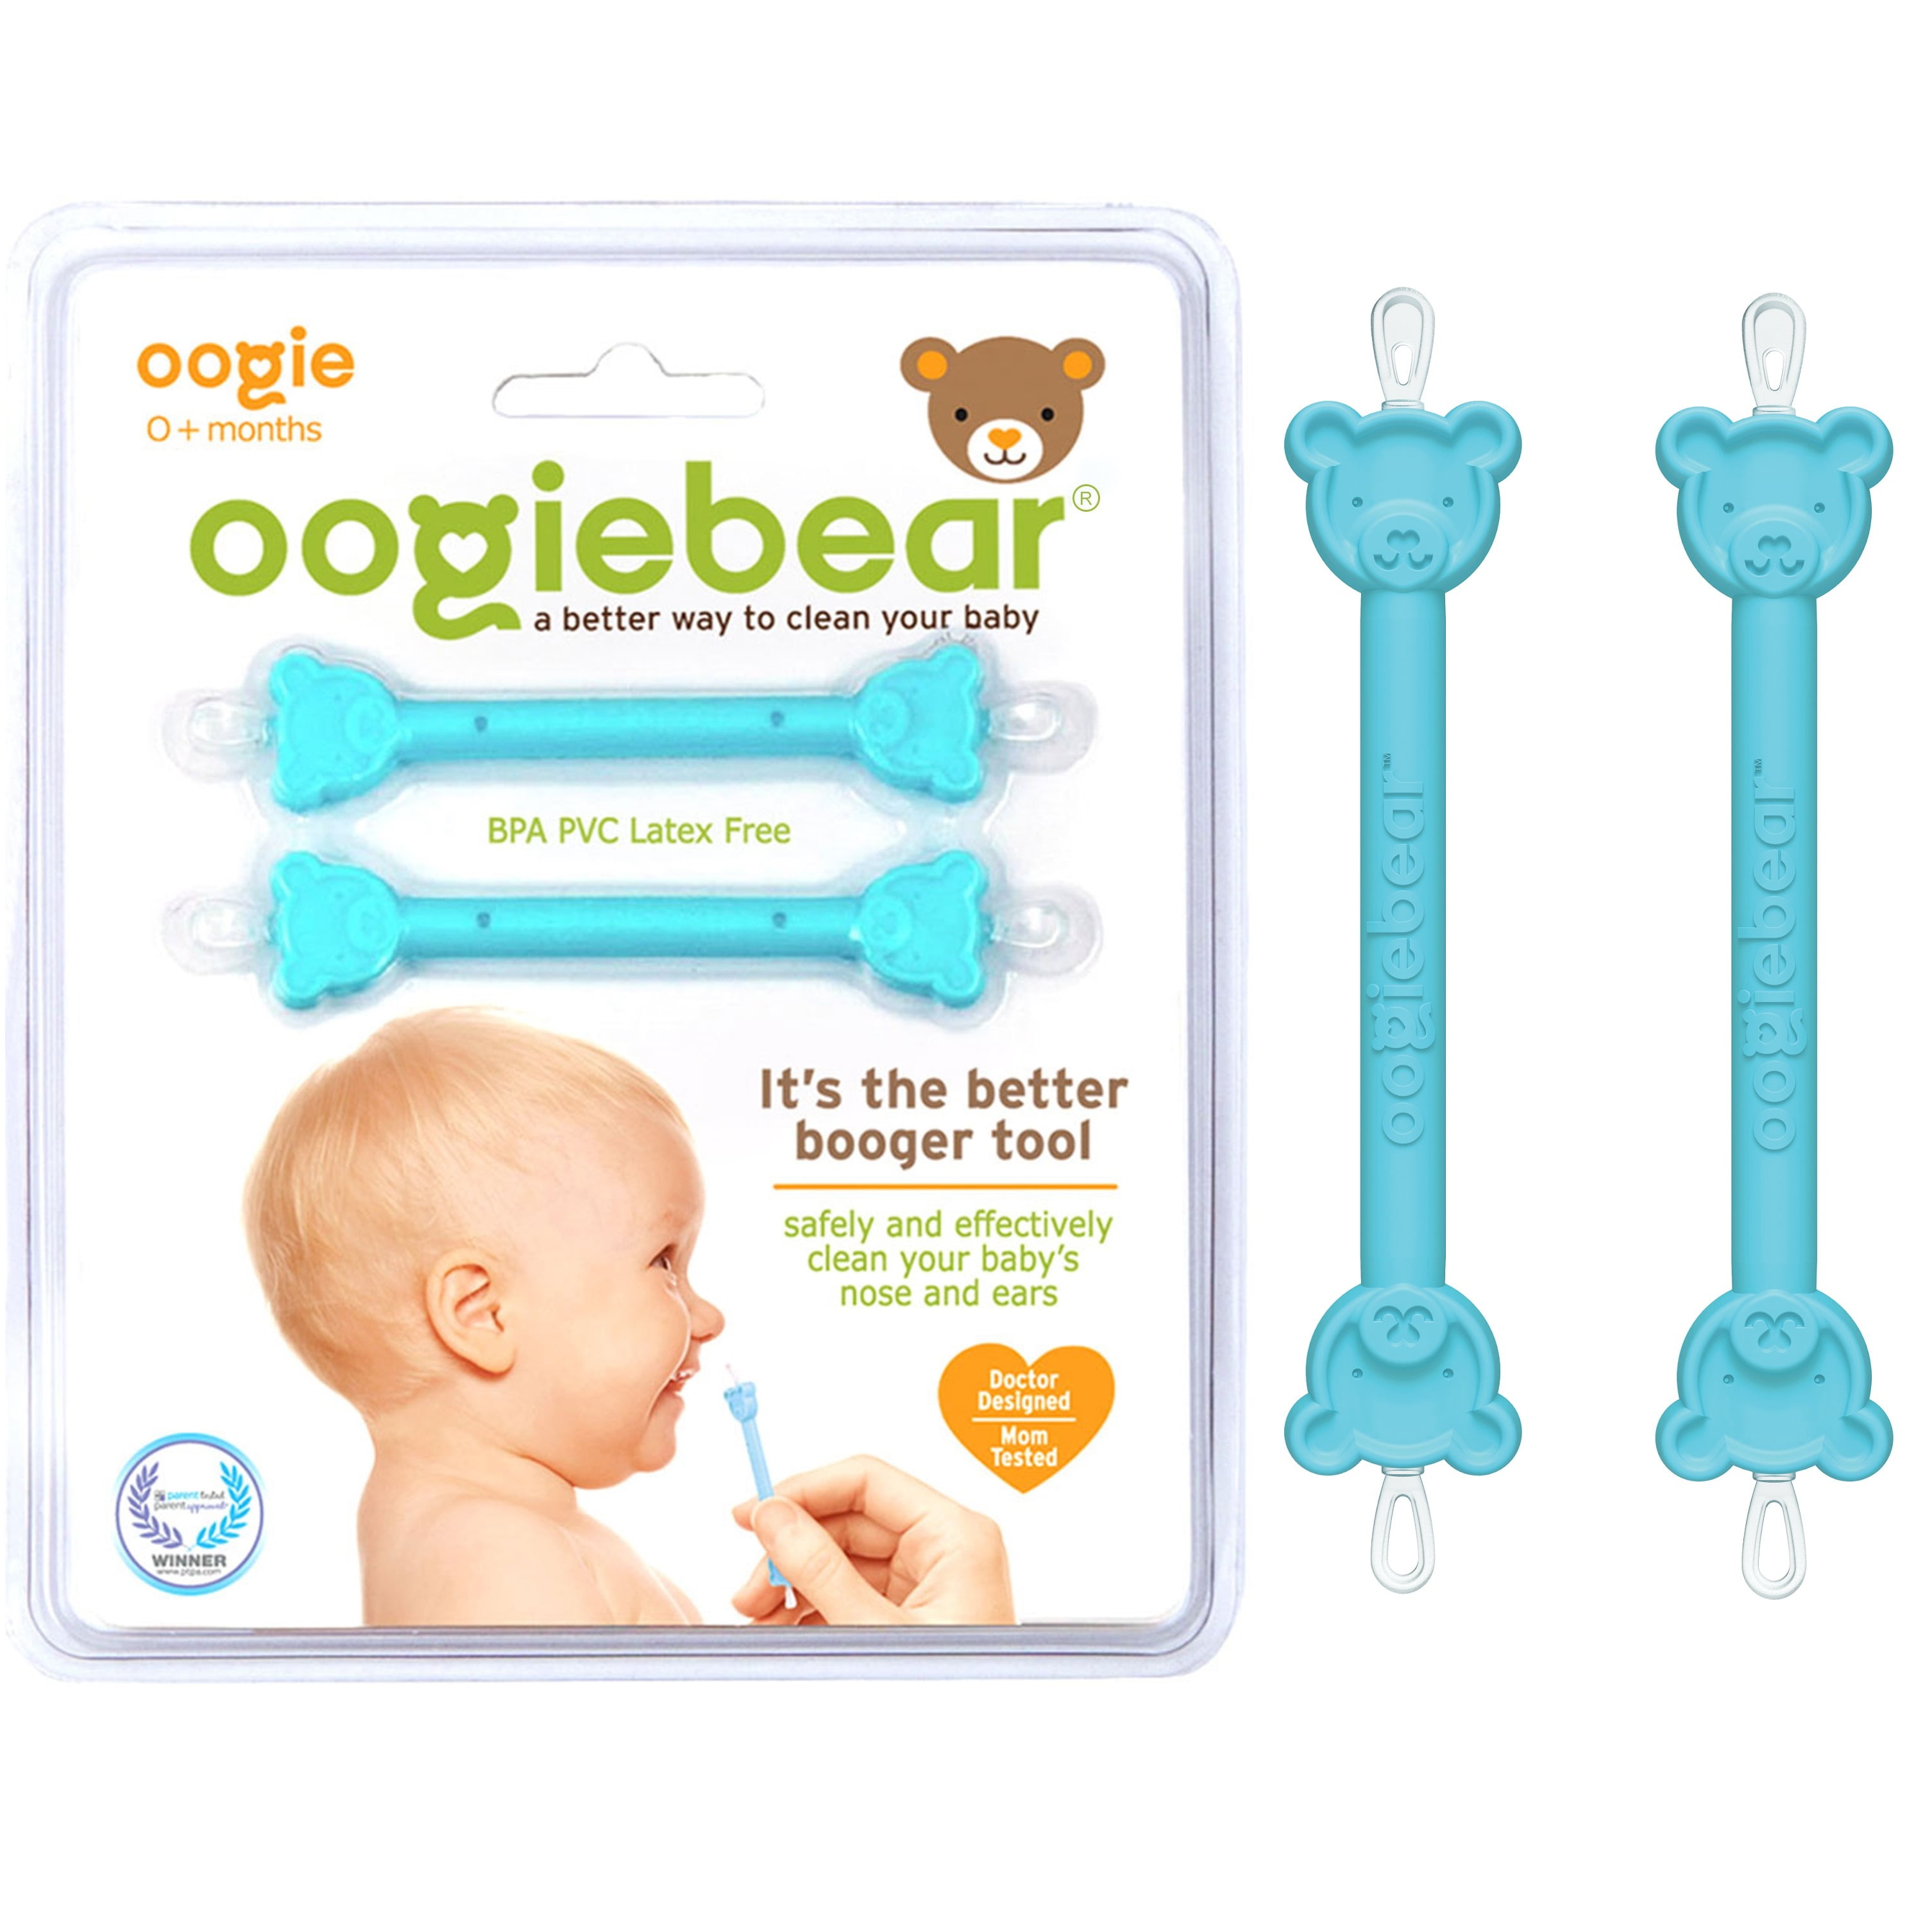 Wholesale oogiebear® Nasal Booger and Ear Wax Remover for babies for your  store - Faire